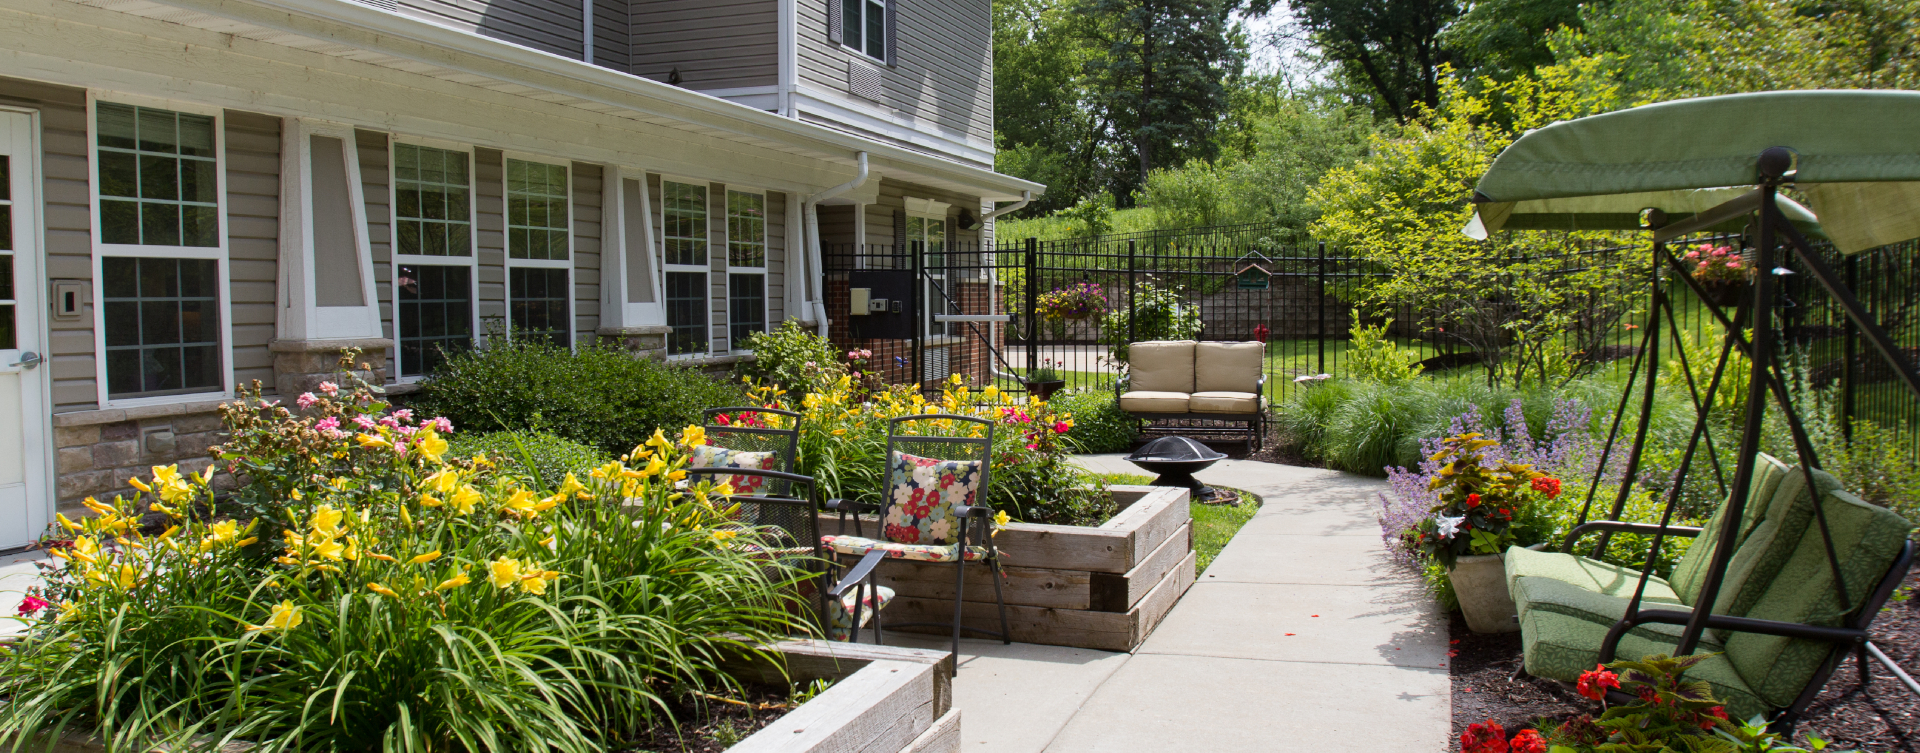 Residents with dementia can enjoy the outdoors by stepping into our secure courtyard at Bickford of St. Charles